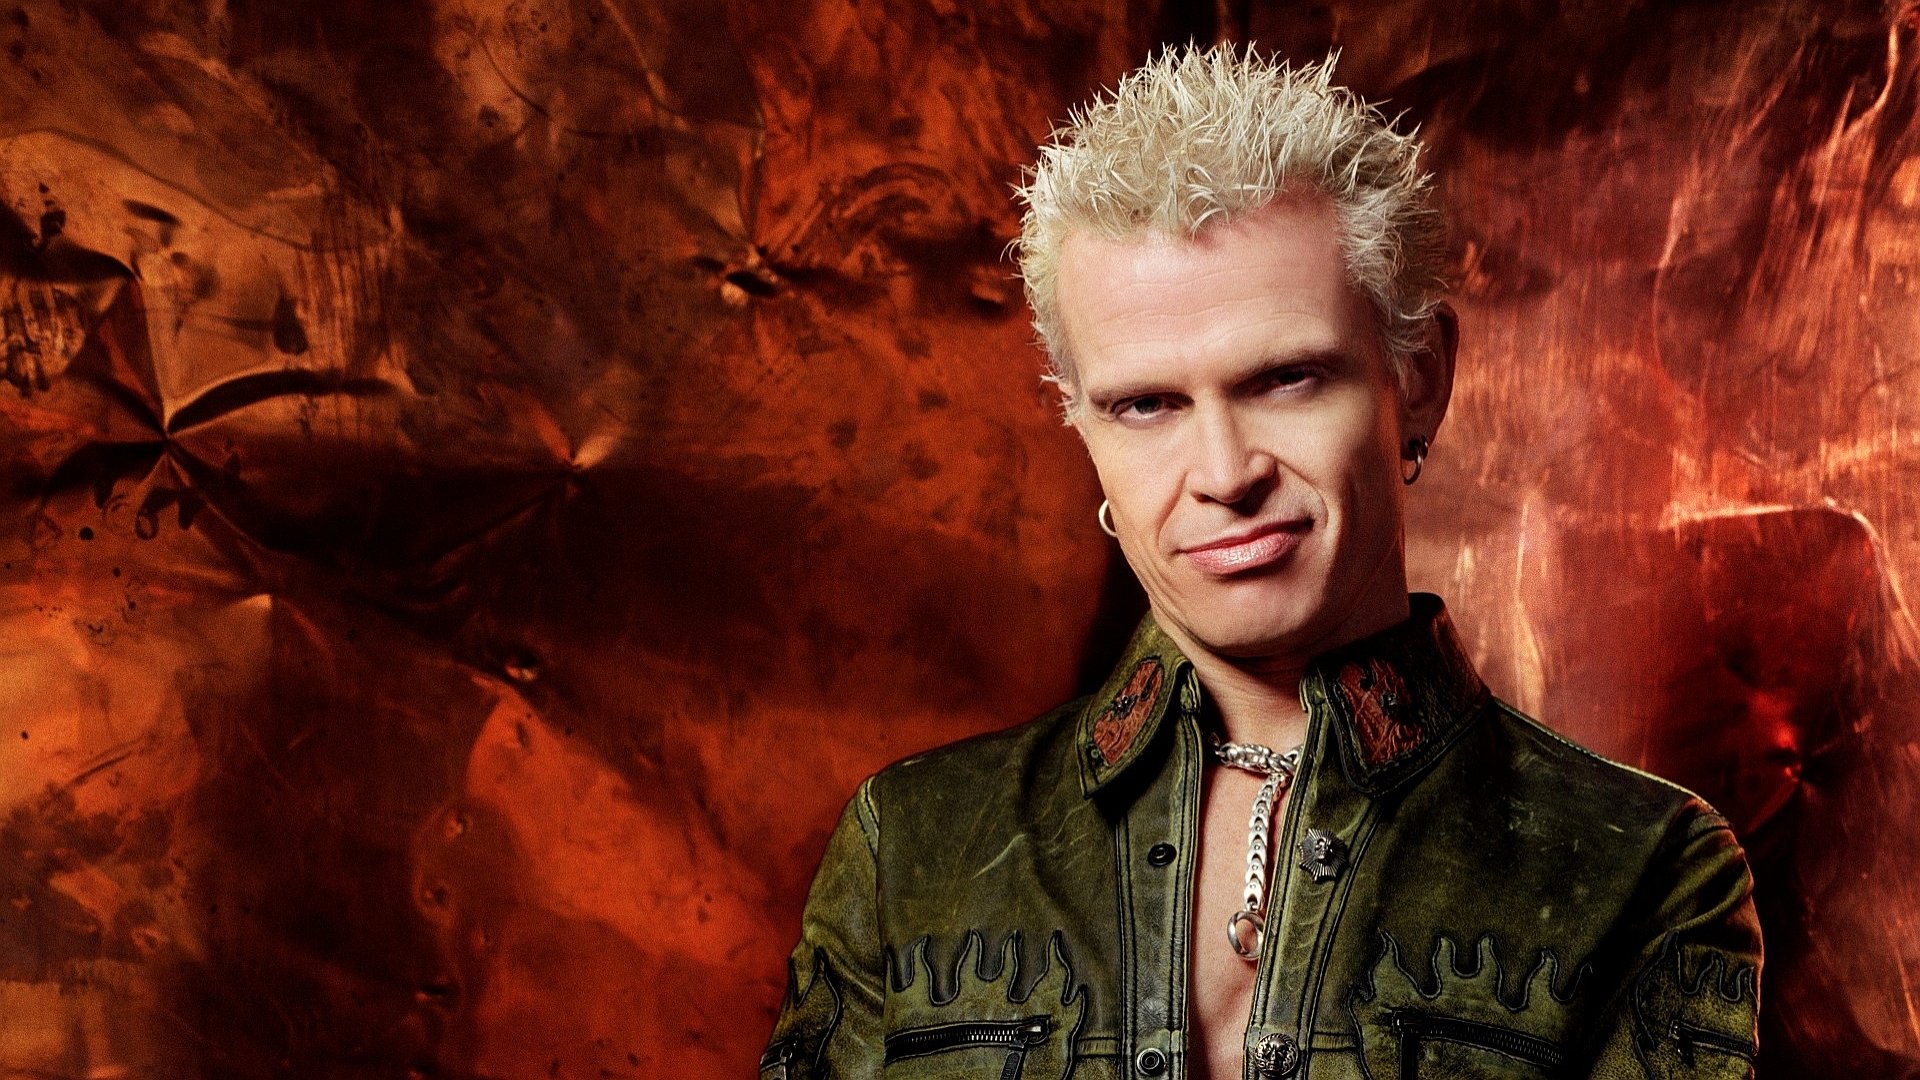 Billy Idol Full HD Wallpaper and Background Image | 1920x1080 | ID:195878